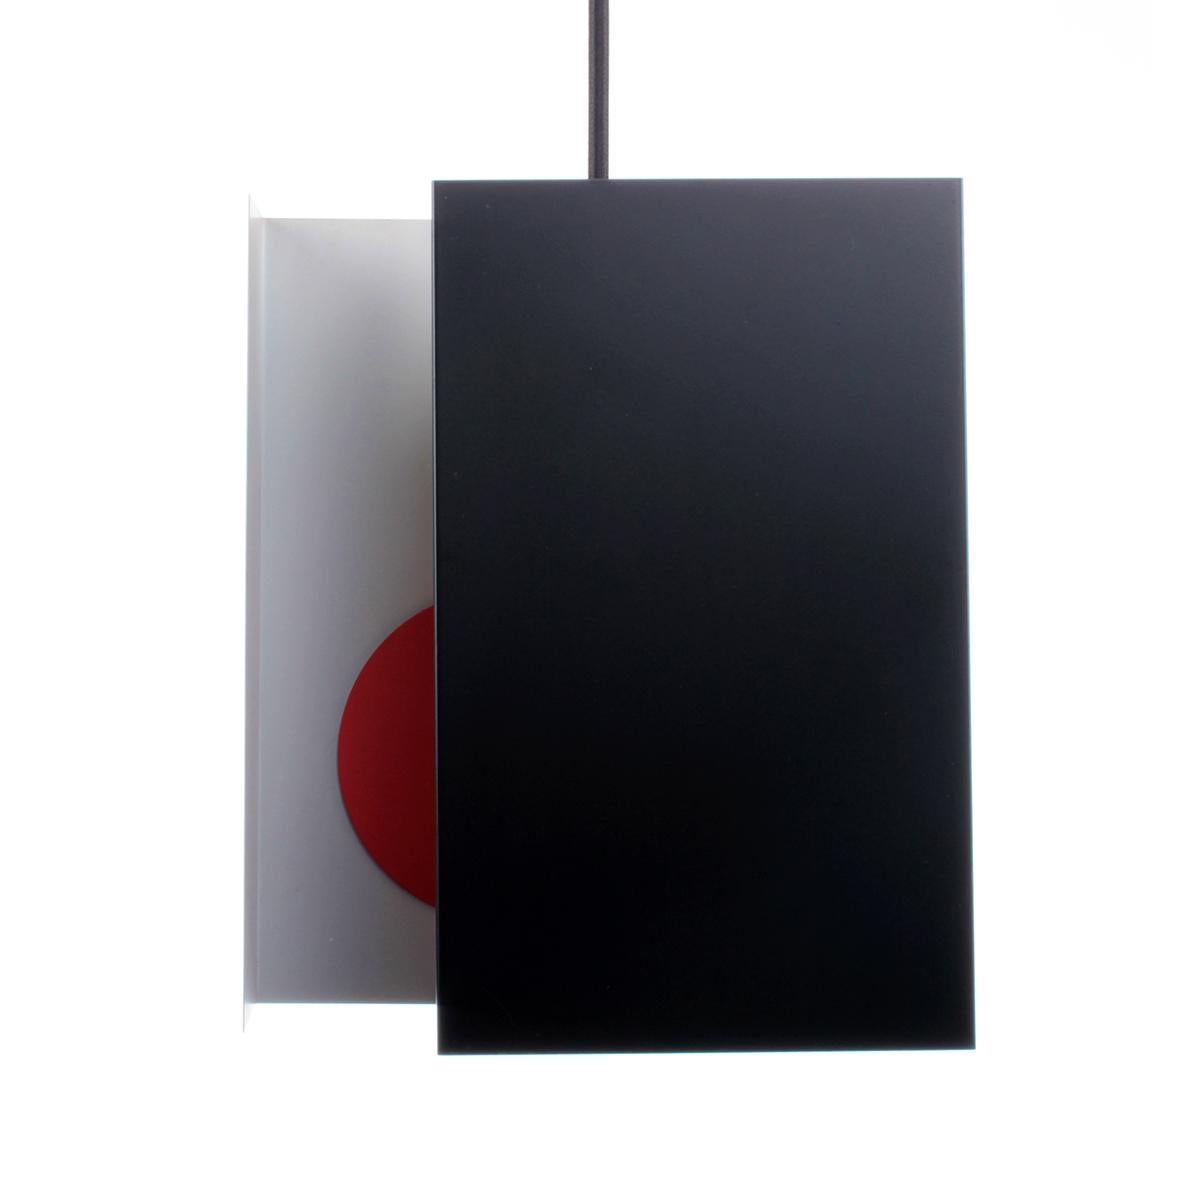 Nippon, ceiling light or table lamp designed by Simon P. Henningsen for LYFA in 1970 - Scandinavian Modern red and black pendant or table light in very good vintage condition.

Extremely rare Danish midcentury design piece - a top-tier and